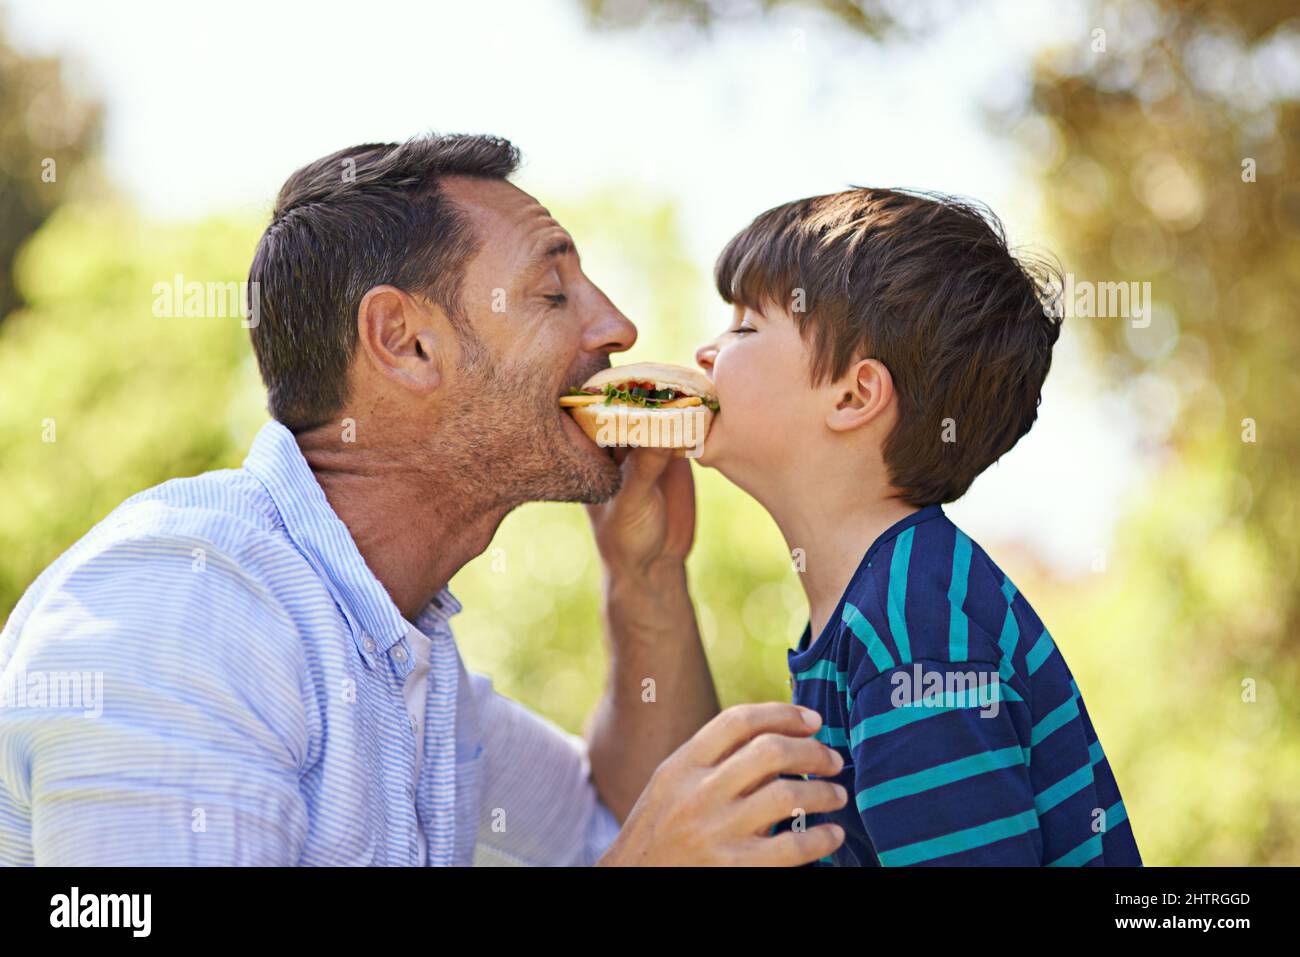 Whos got the biggest bite. Shot of a father and son biting into a sandwich at the same time. Stock Photo